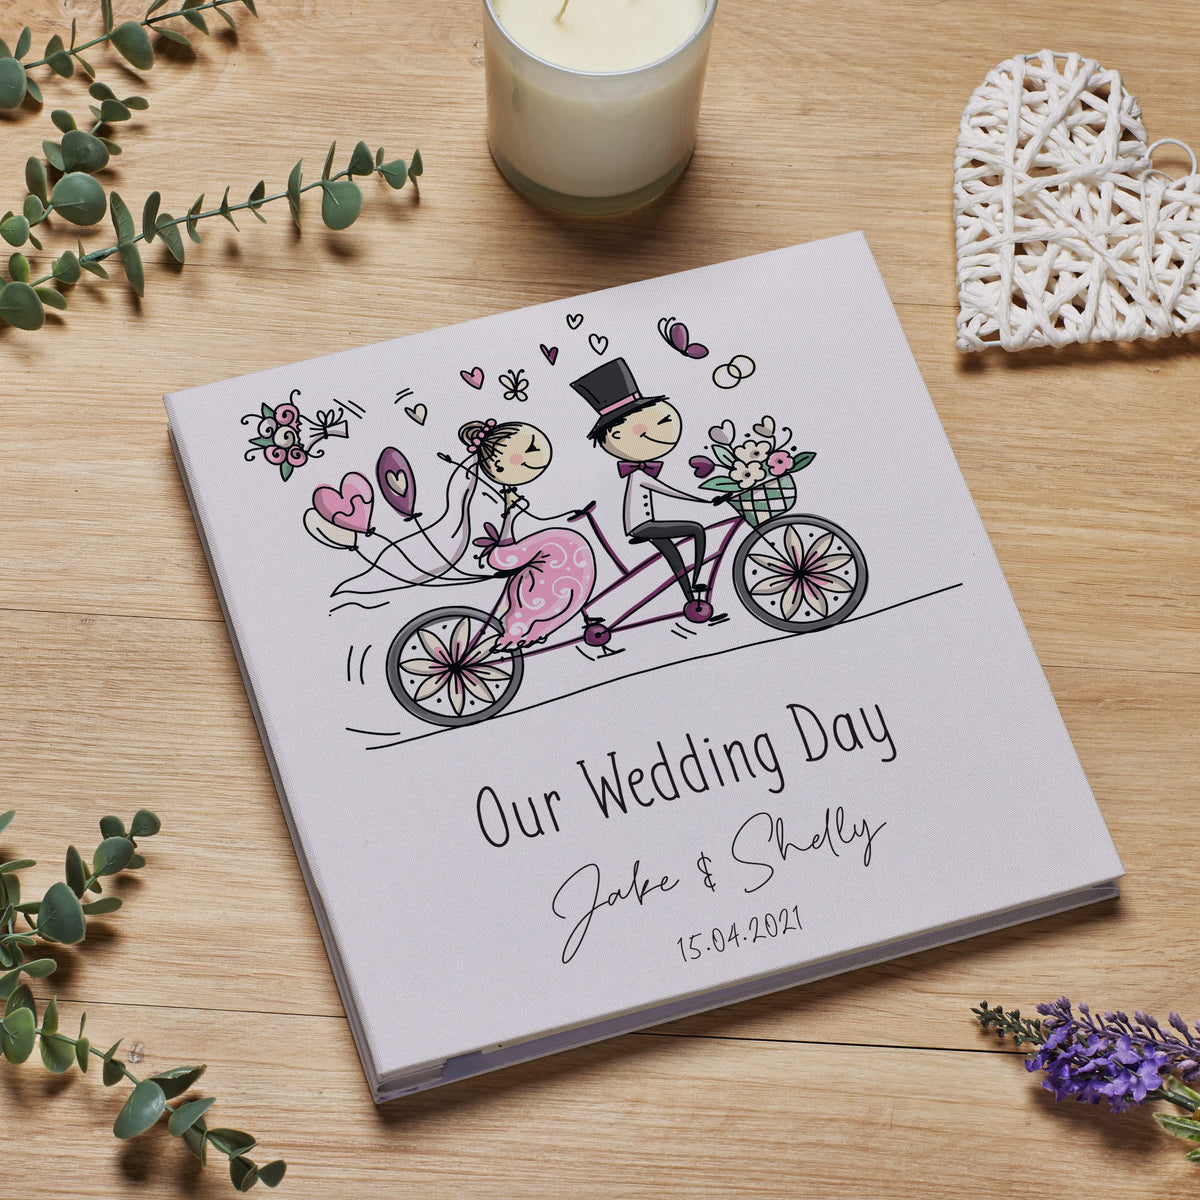 Personalised Large Linen Our Wedding Day Photo Album With Sketched Couple